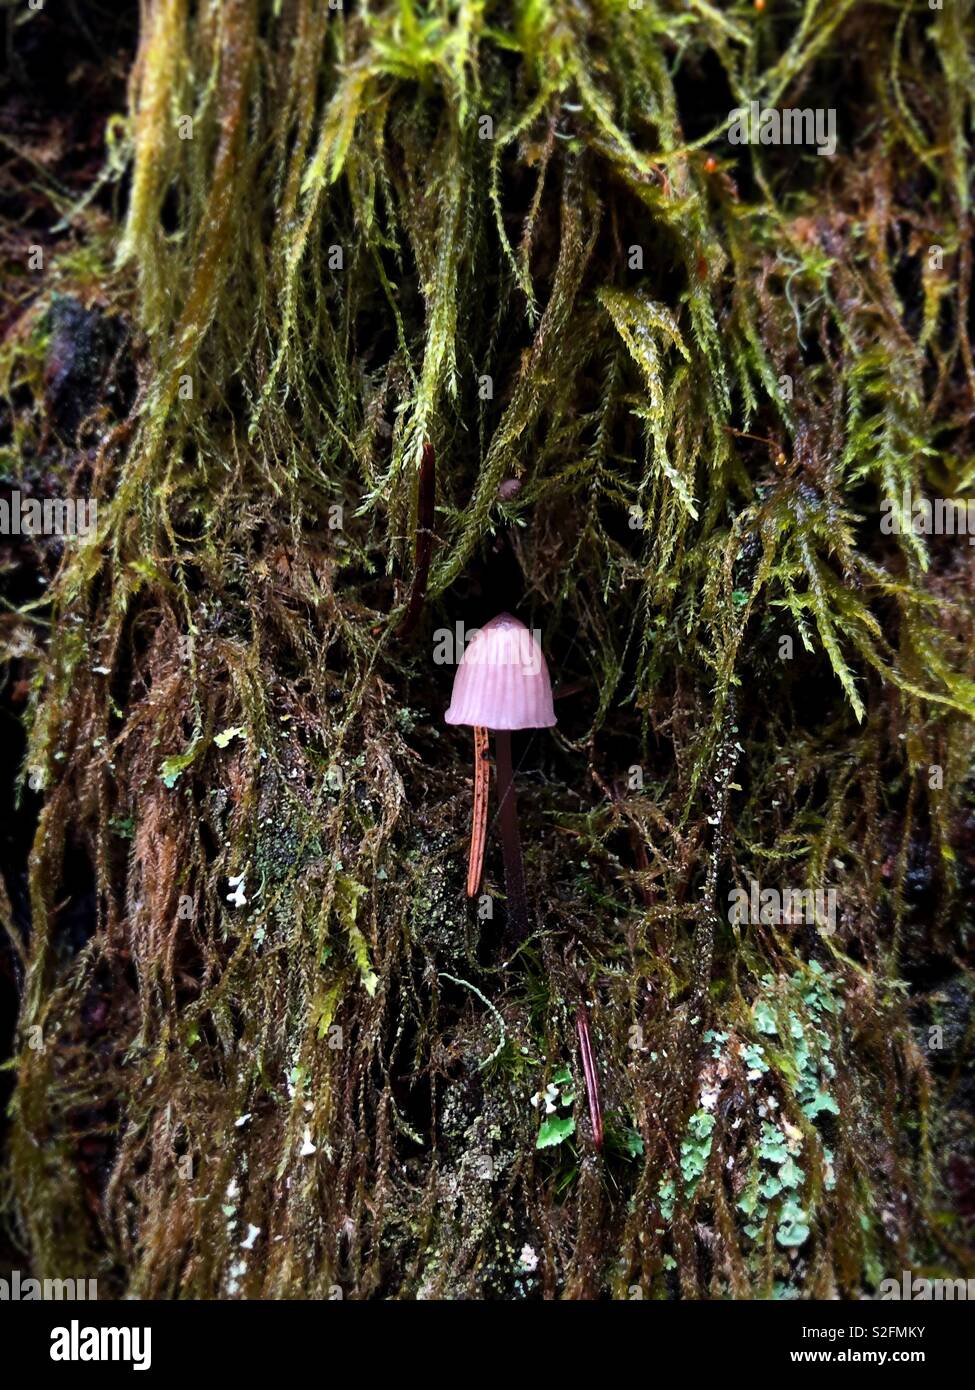 A tiny mushroom growing on a mossy tree trunk in Eugene, Oregon, USA. Stock Photo